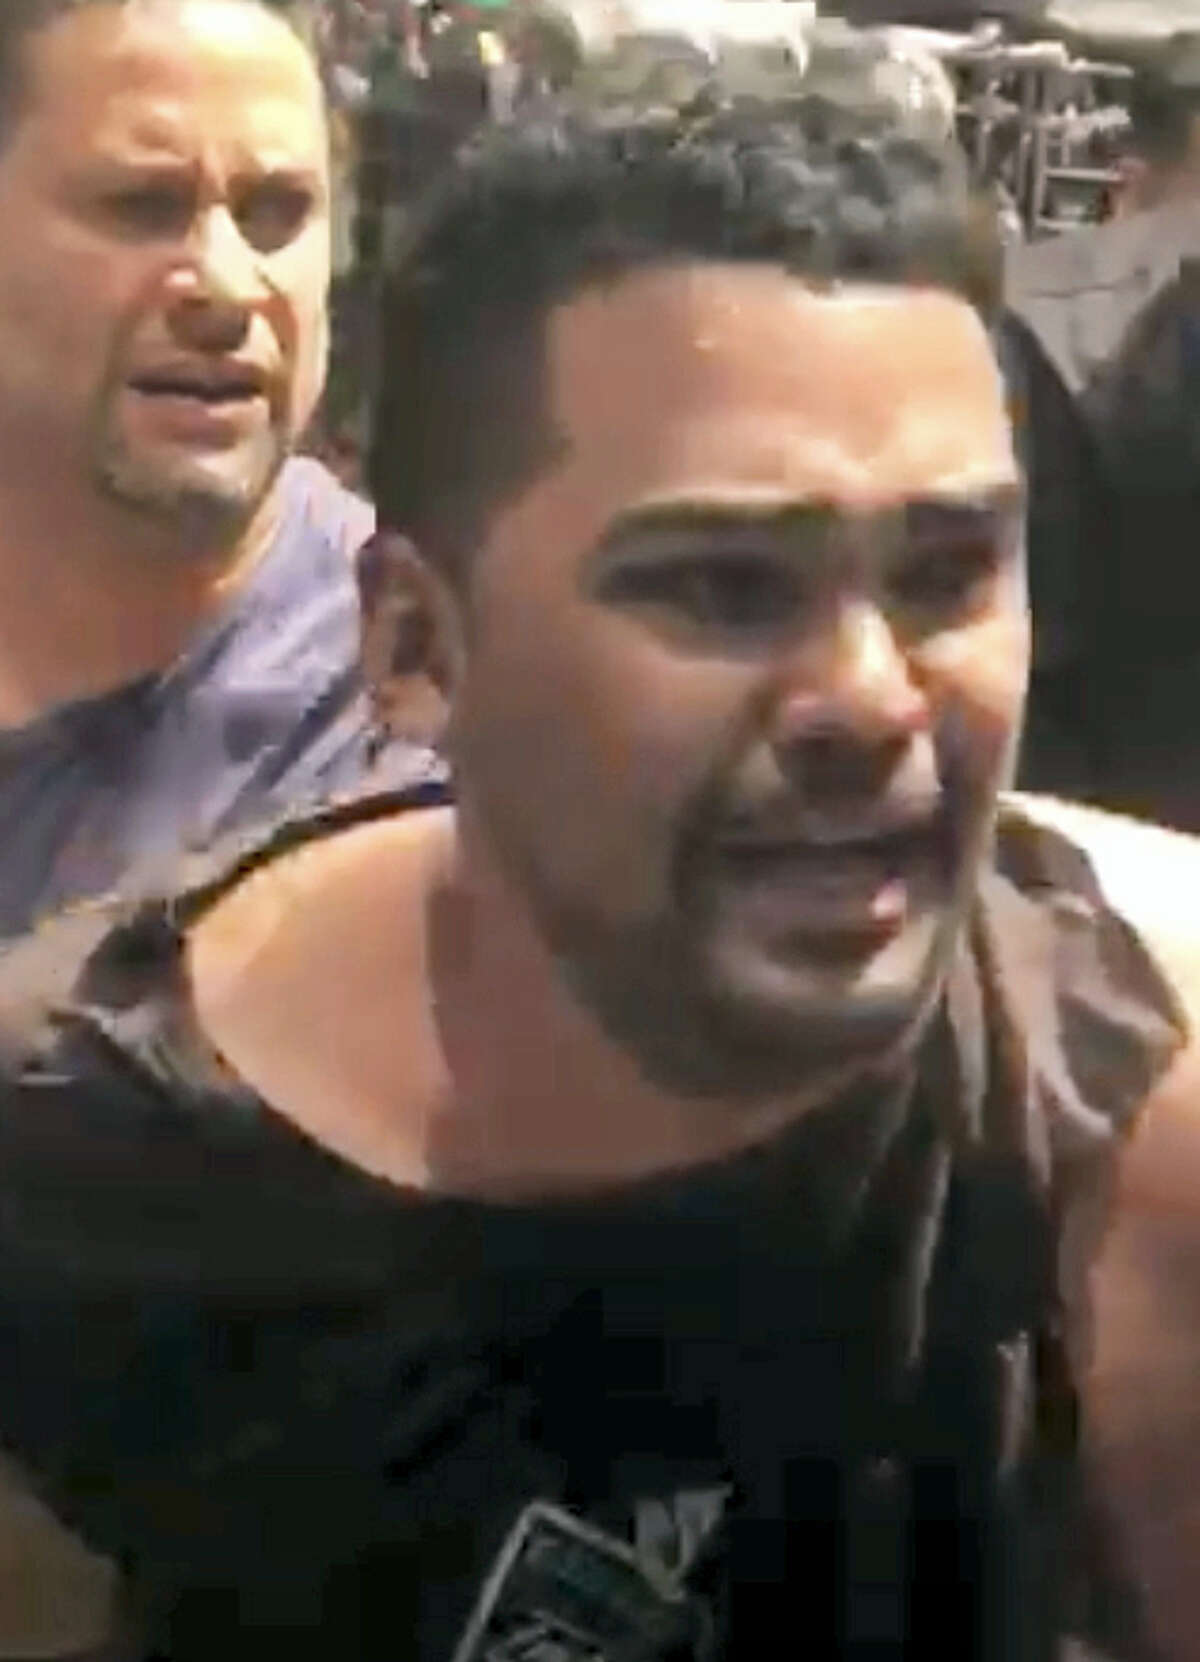 In this image made from video provided by Oscar Navarro Reyes, Richard Rojas is arrested after a fatal automobile accident on New York City’s Times Square, Thursday, May 18, 2017. Authorities and witnesses said Rojas drove his car the wrong way up a Times Square street and plowed into pedestrians on the sidewalk.